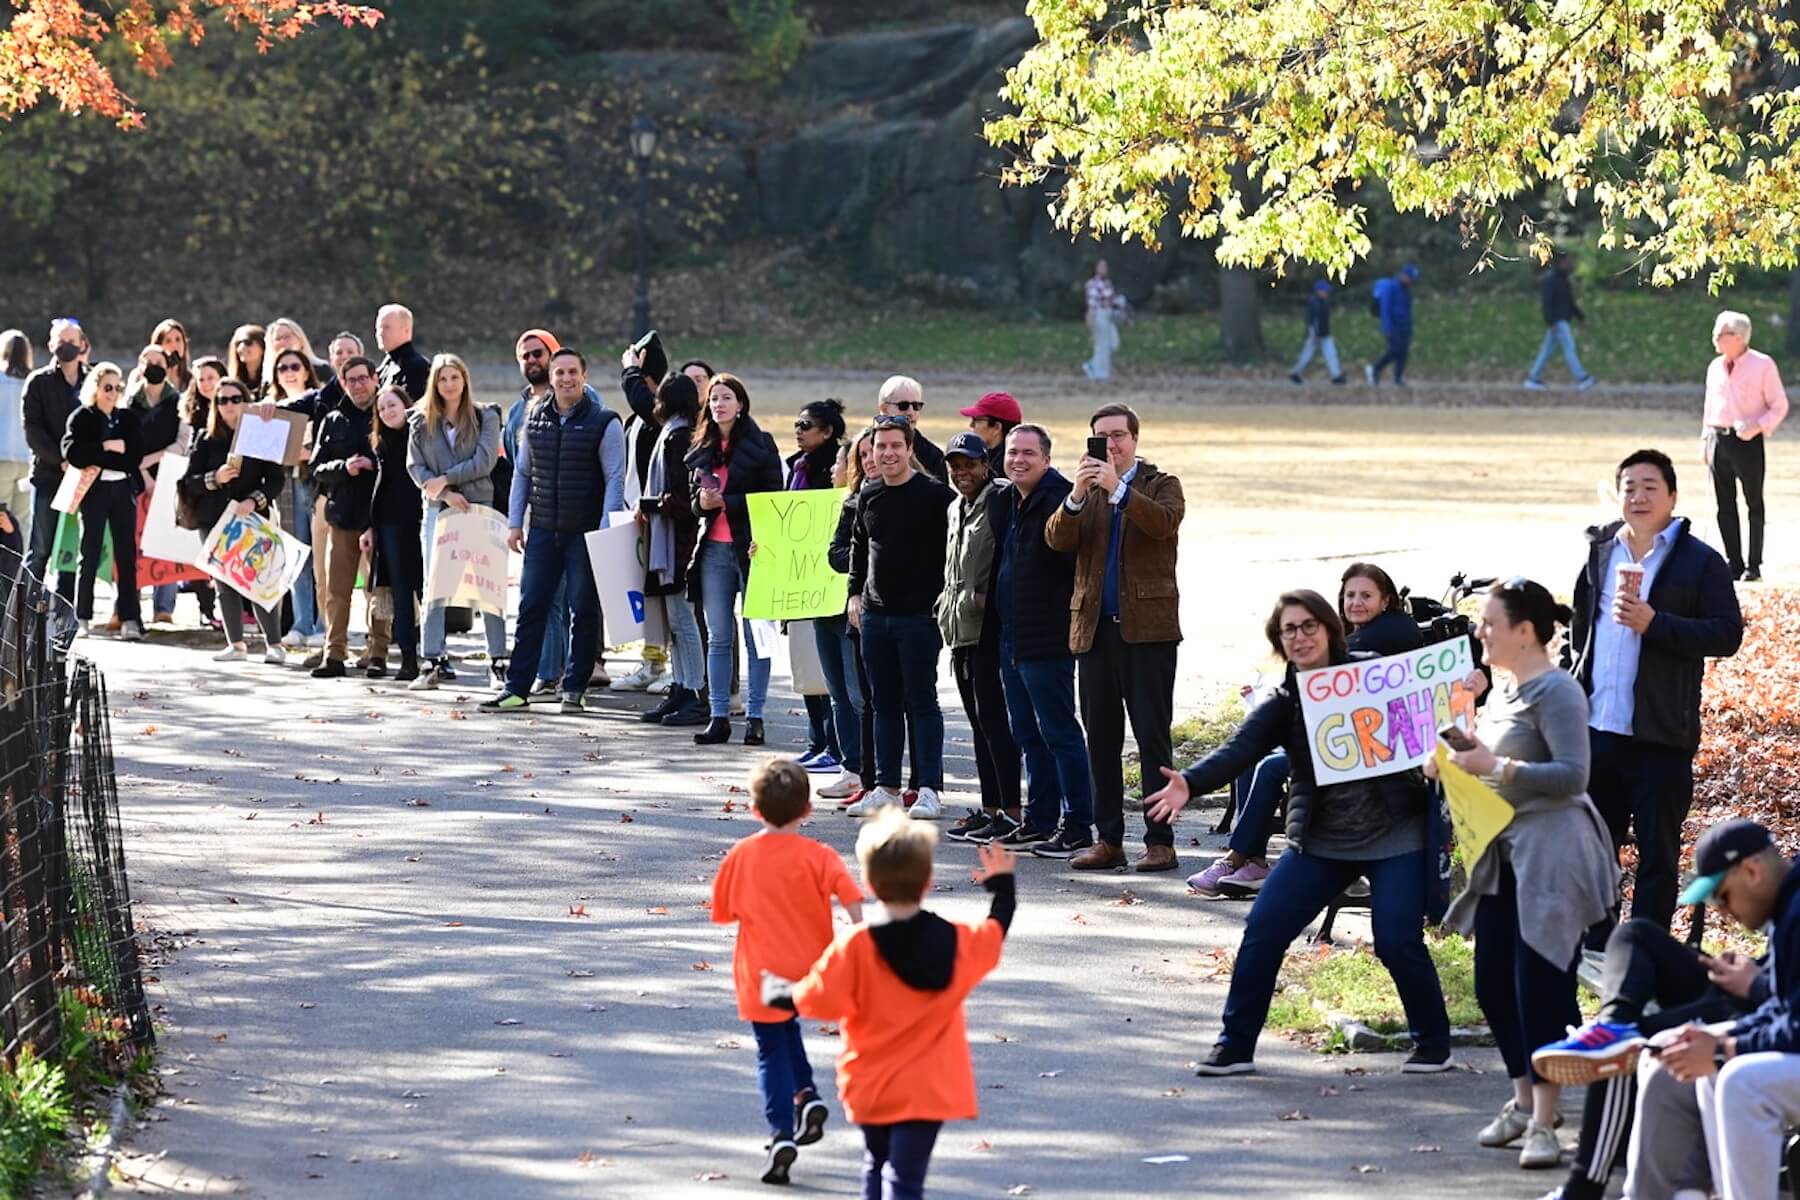 Families cheer on Ethical Culture students with signs as they run in Central Park.